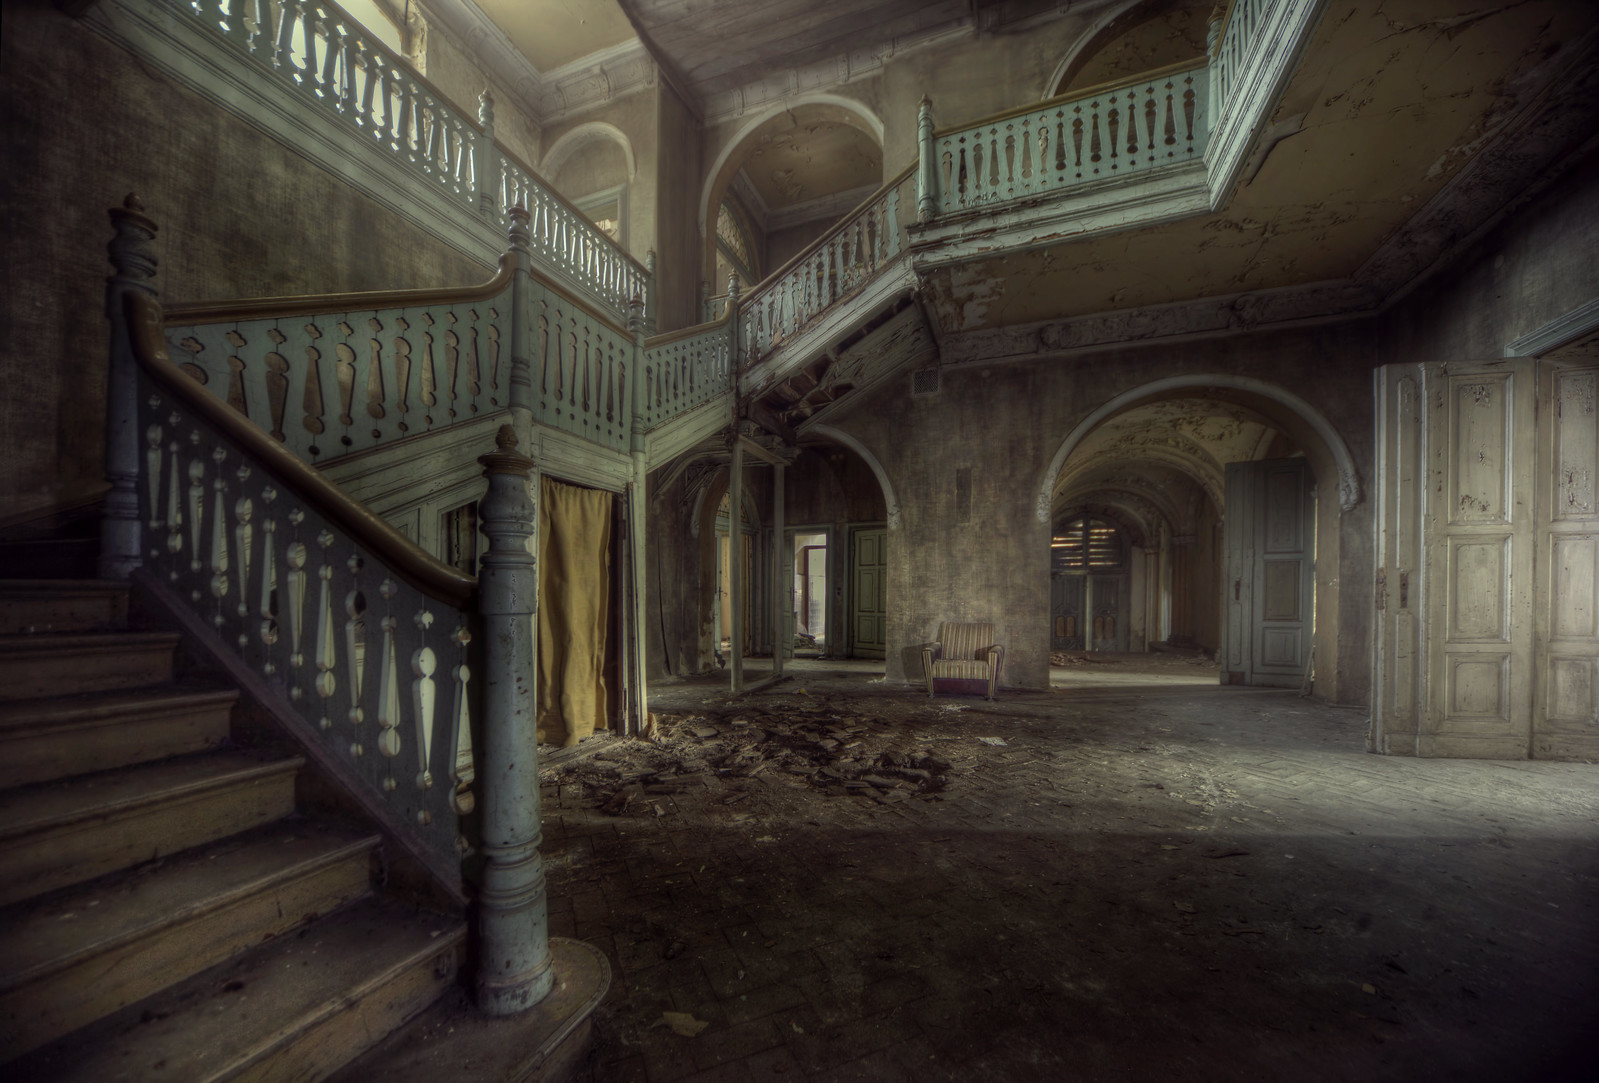 Photo by Andre Govia.